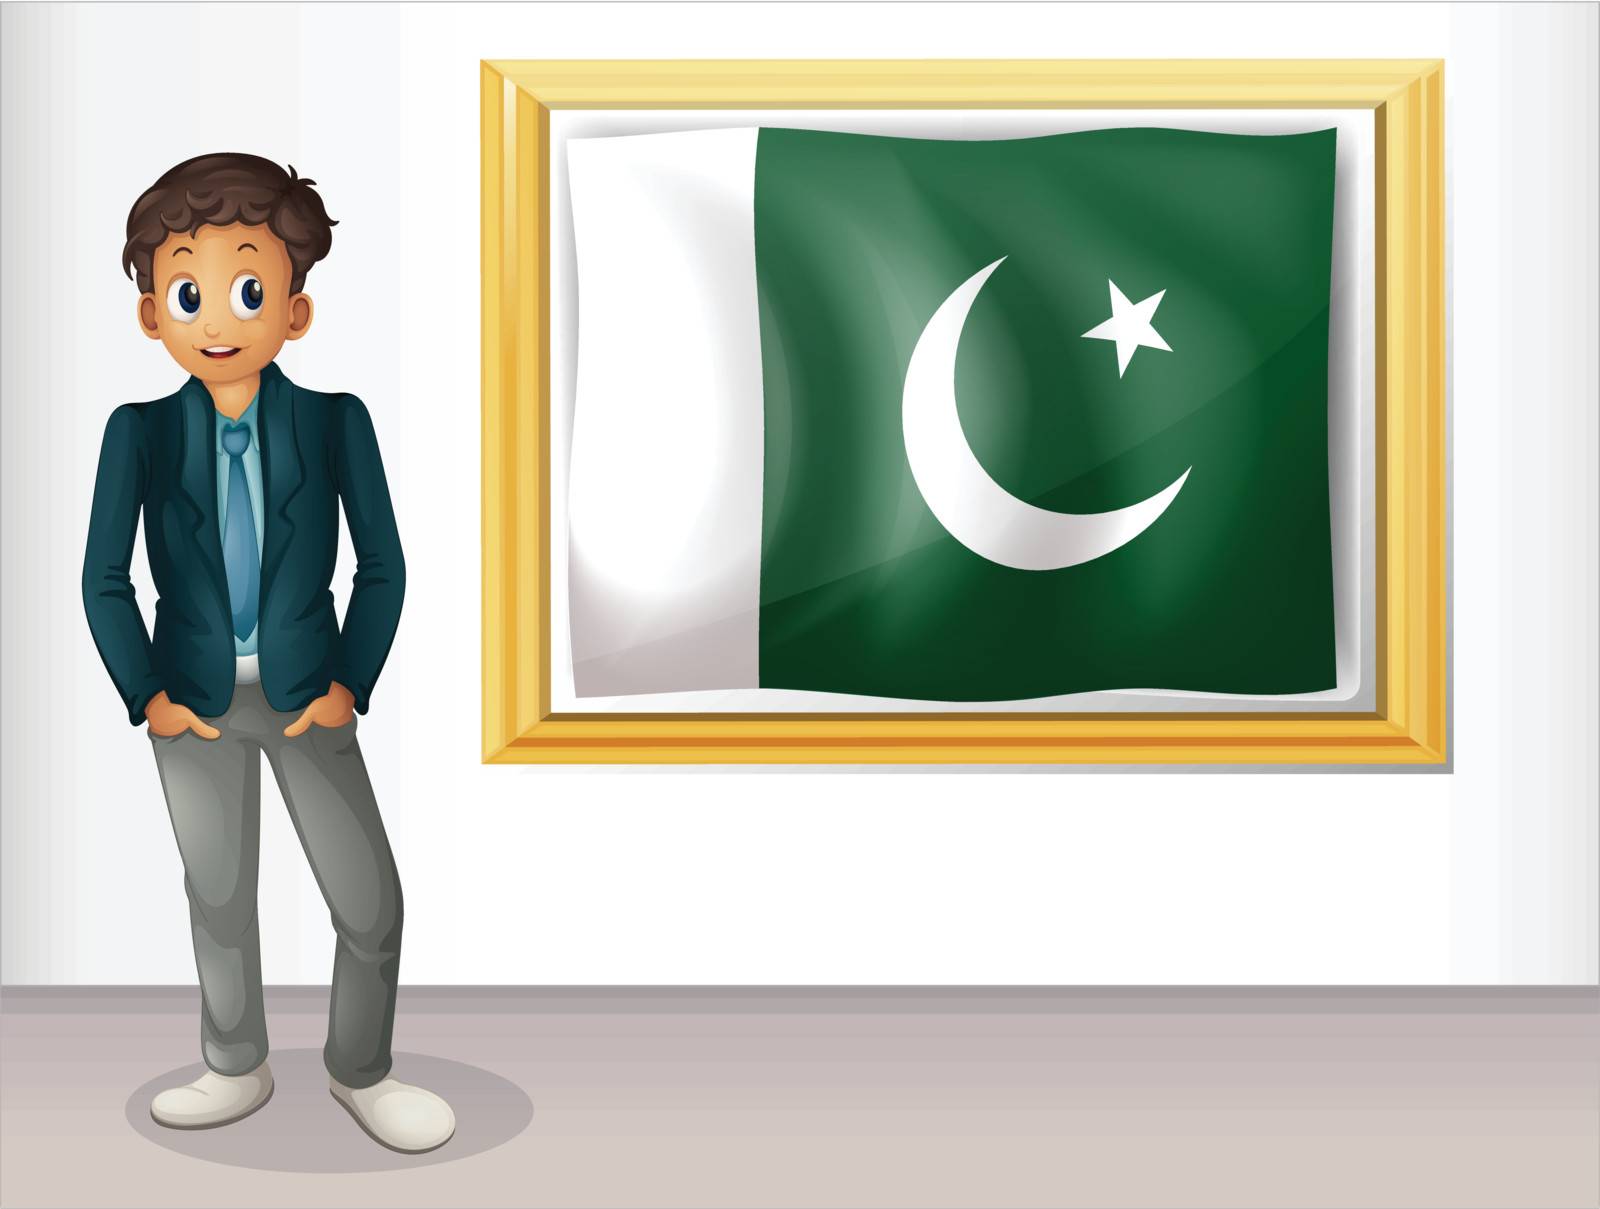 Illustration of a man beside the framed flag of Pakistan on a white background